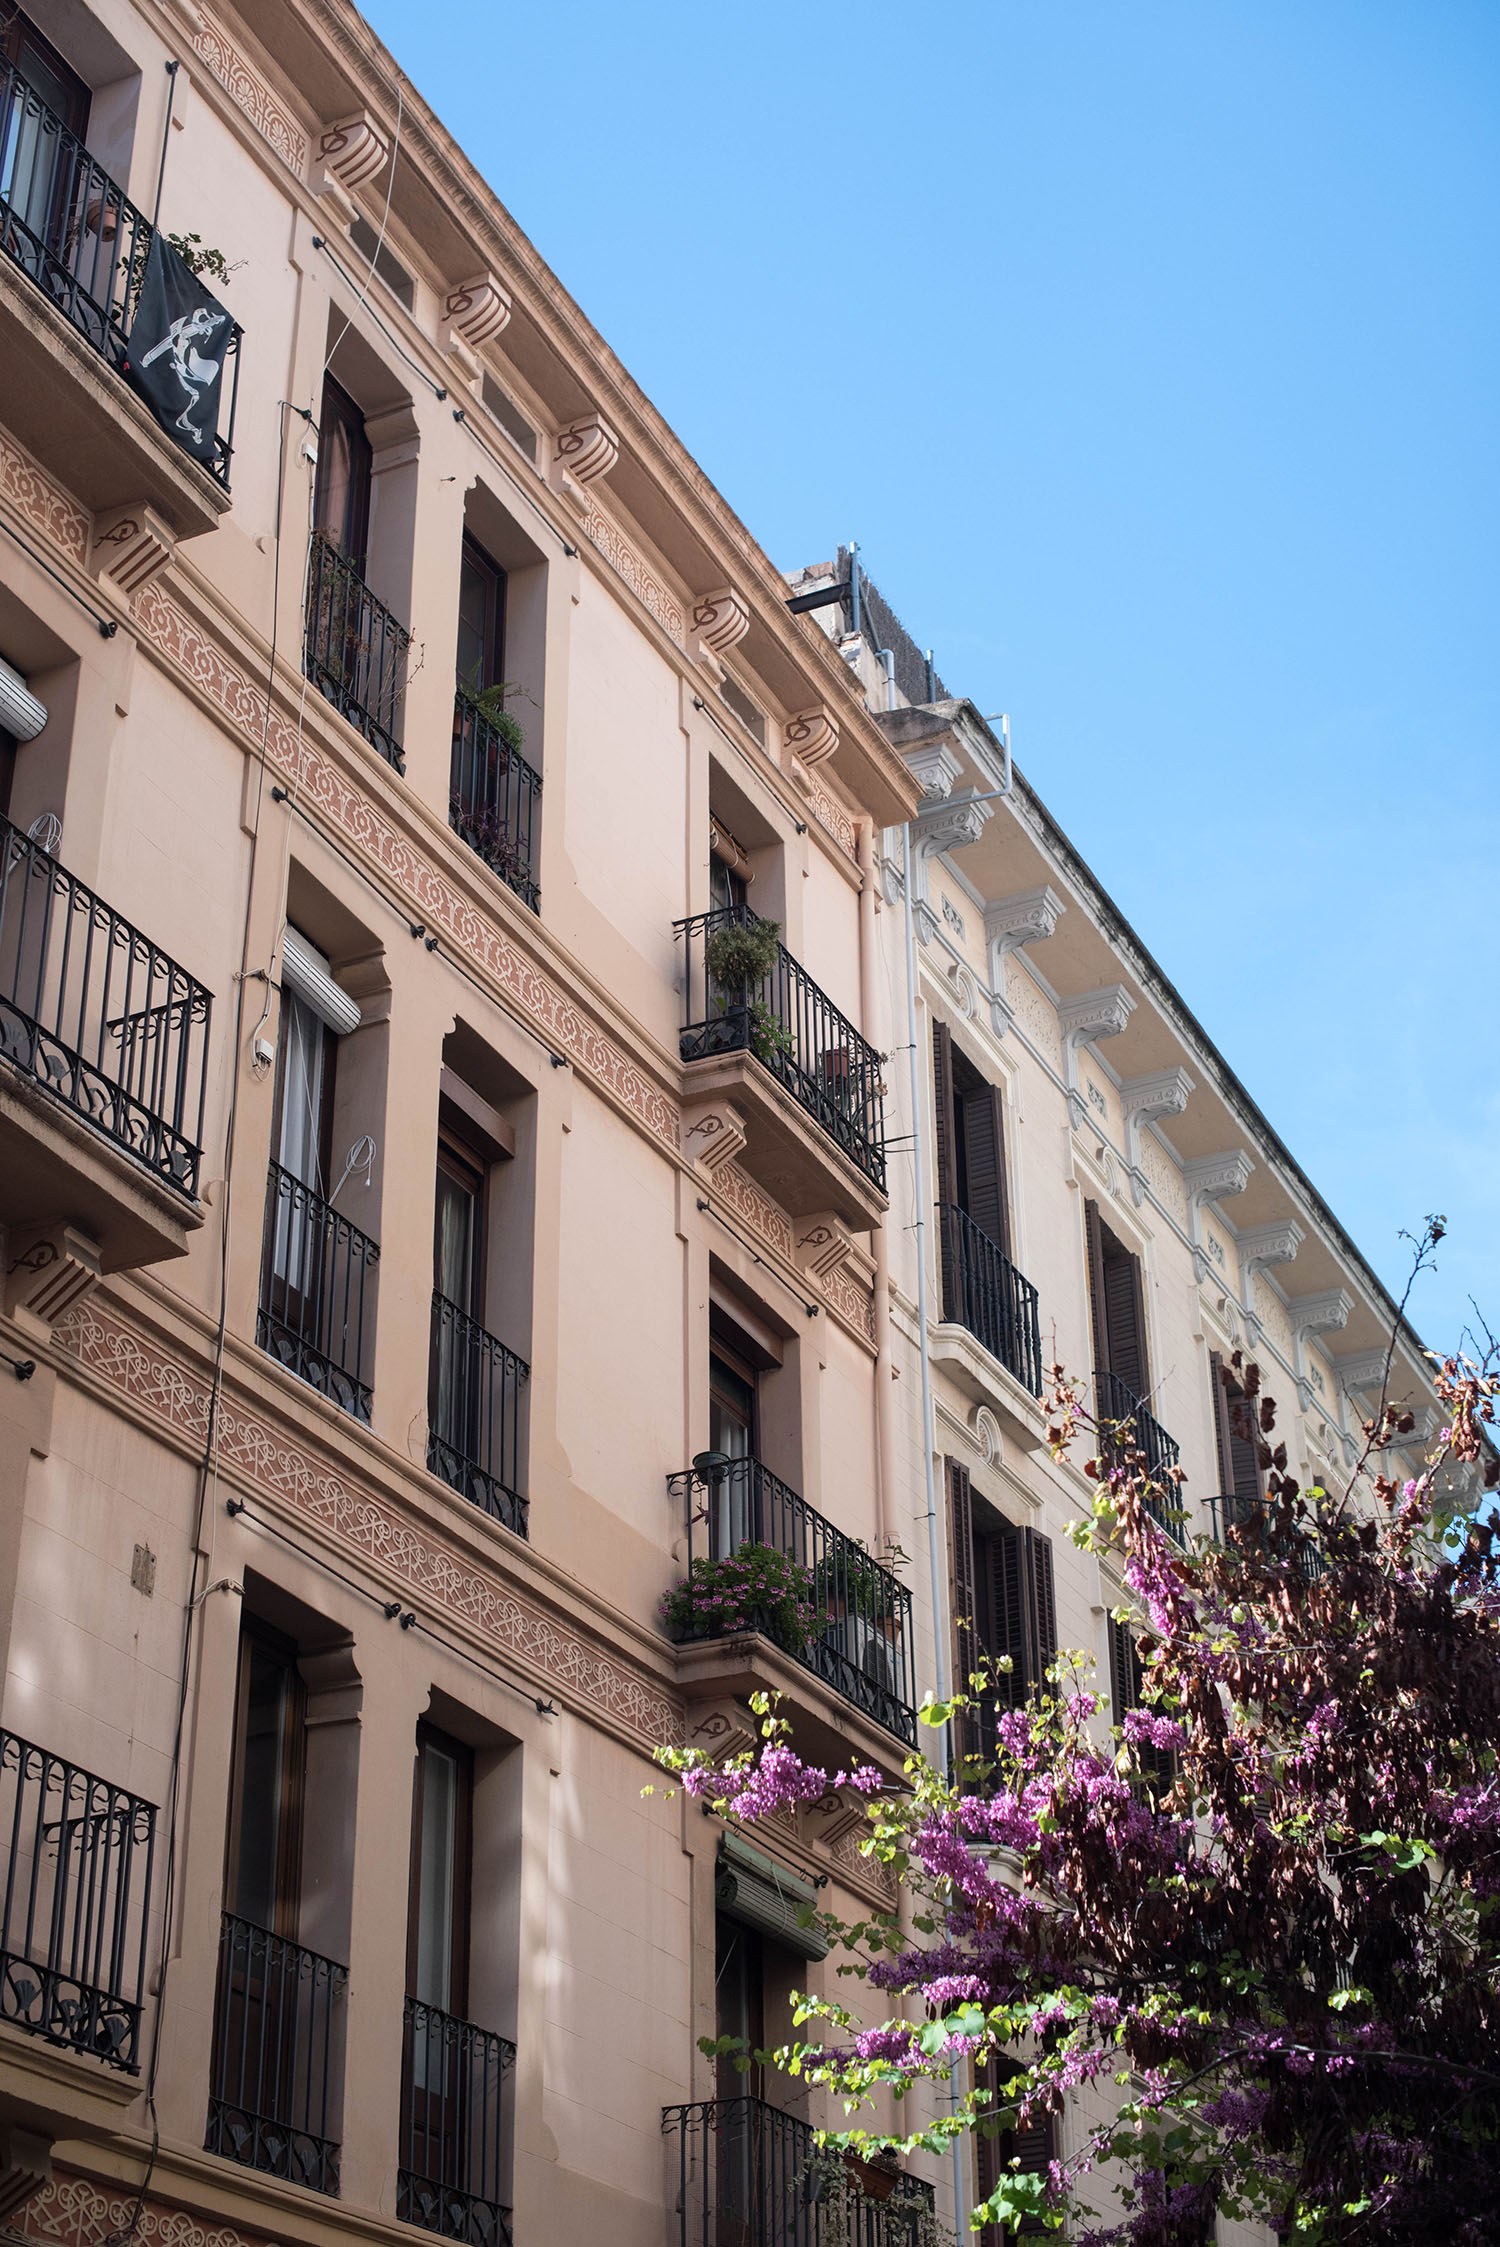 Pastel buildings in Barcelona, Spain, as photographed by Canadian travel blogger Cee Fardoe of Coco & Vera